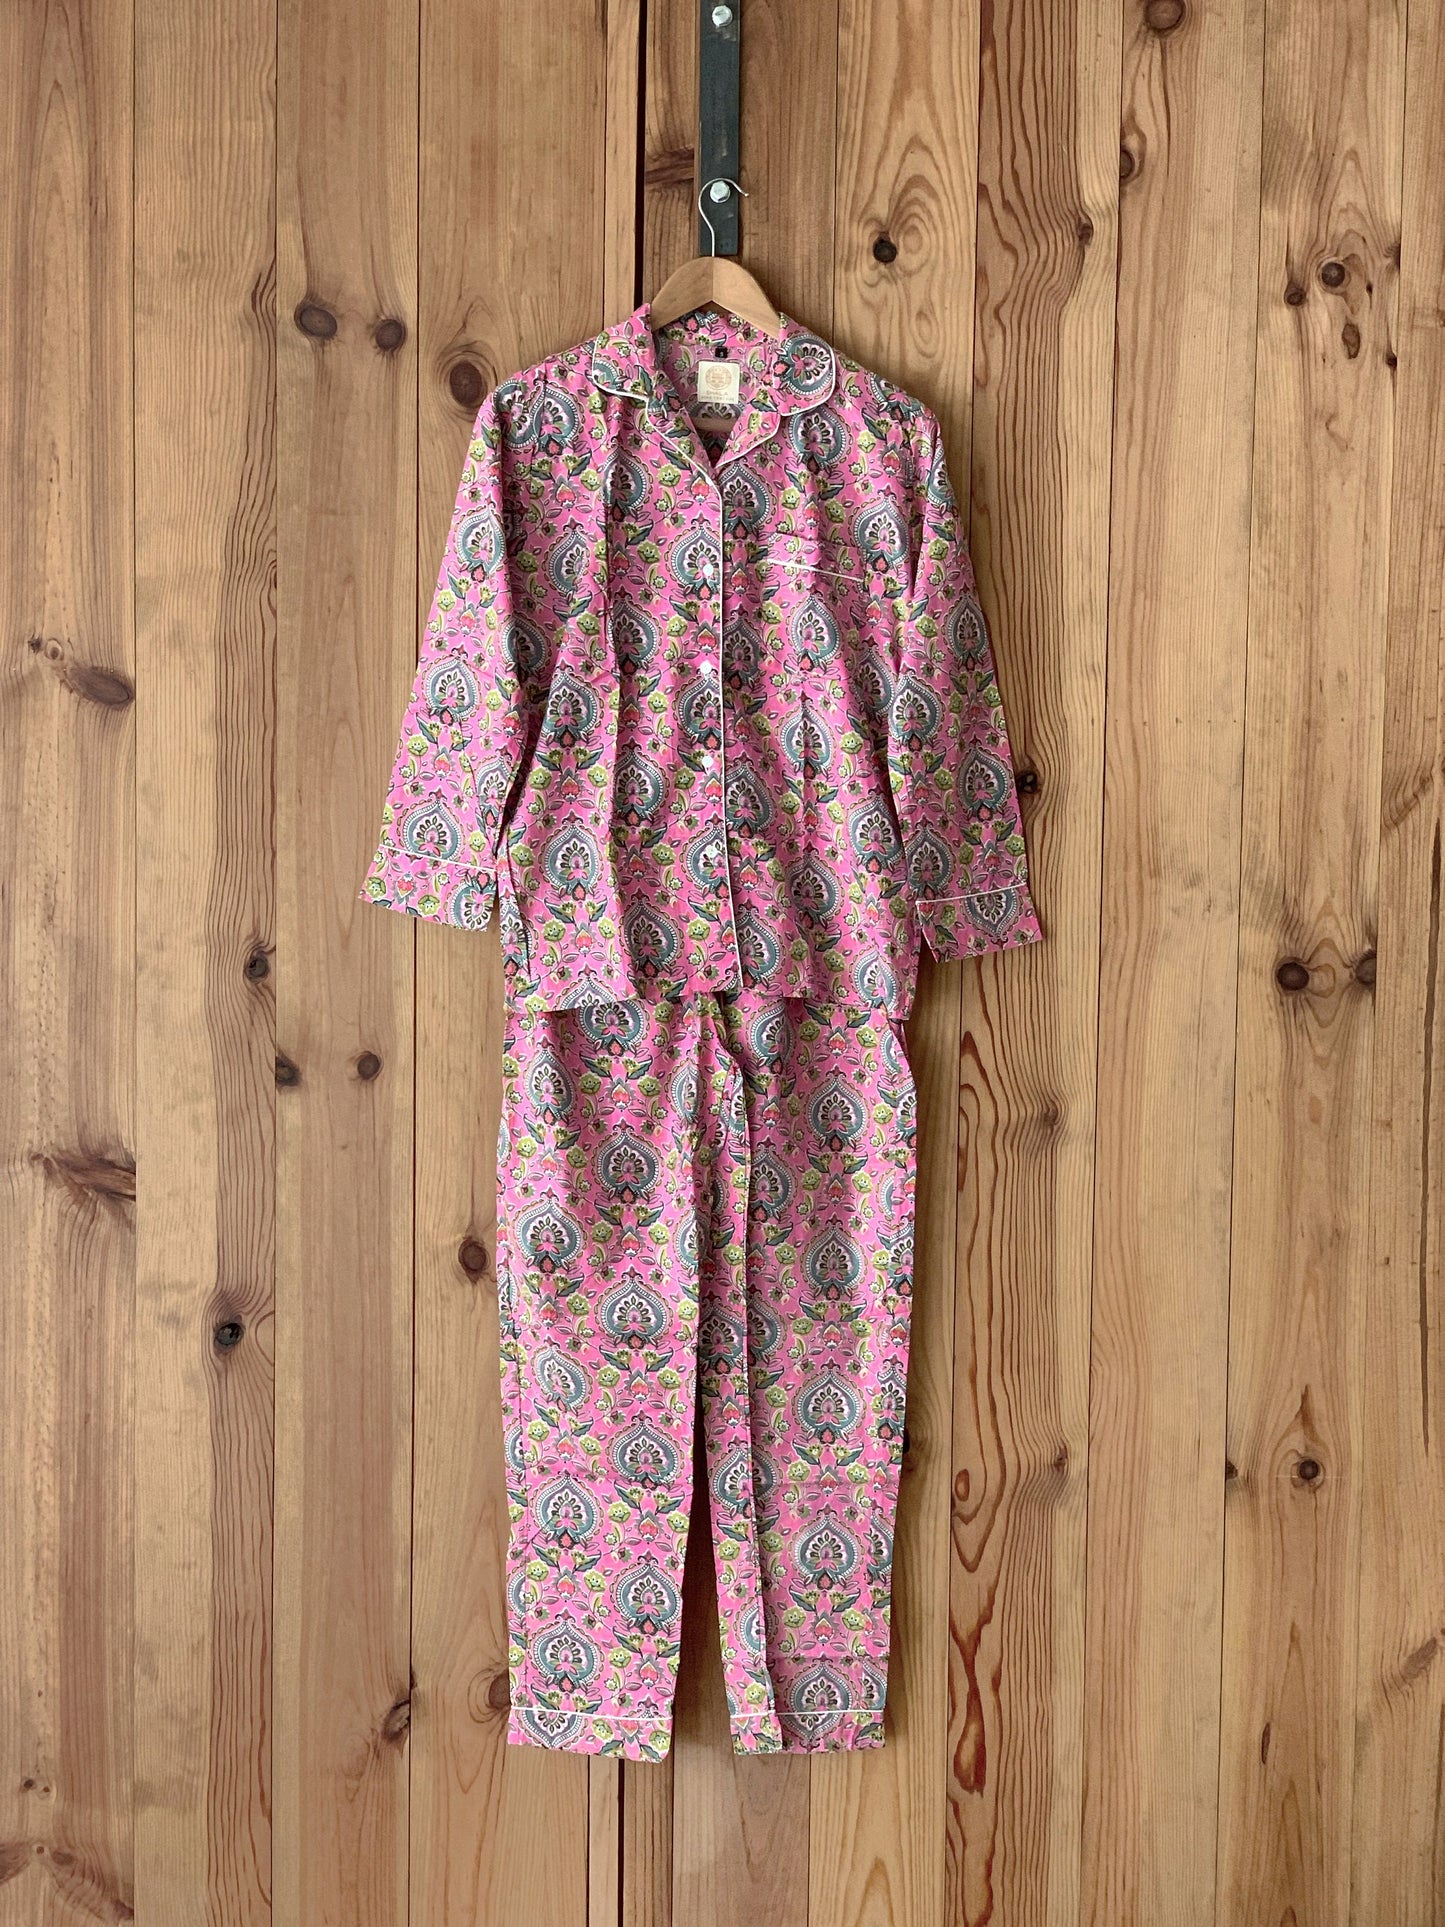 Gift SET Long-sleeved pajamas/trousers and matching slippers Pure cotton block print handmade in India Pink and green